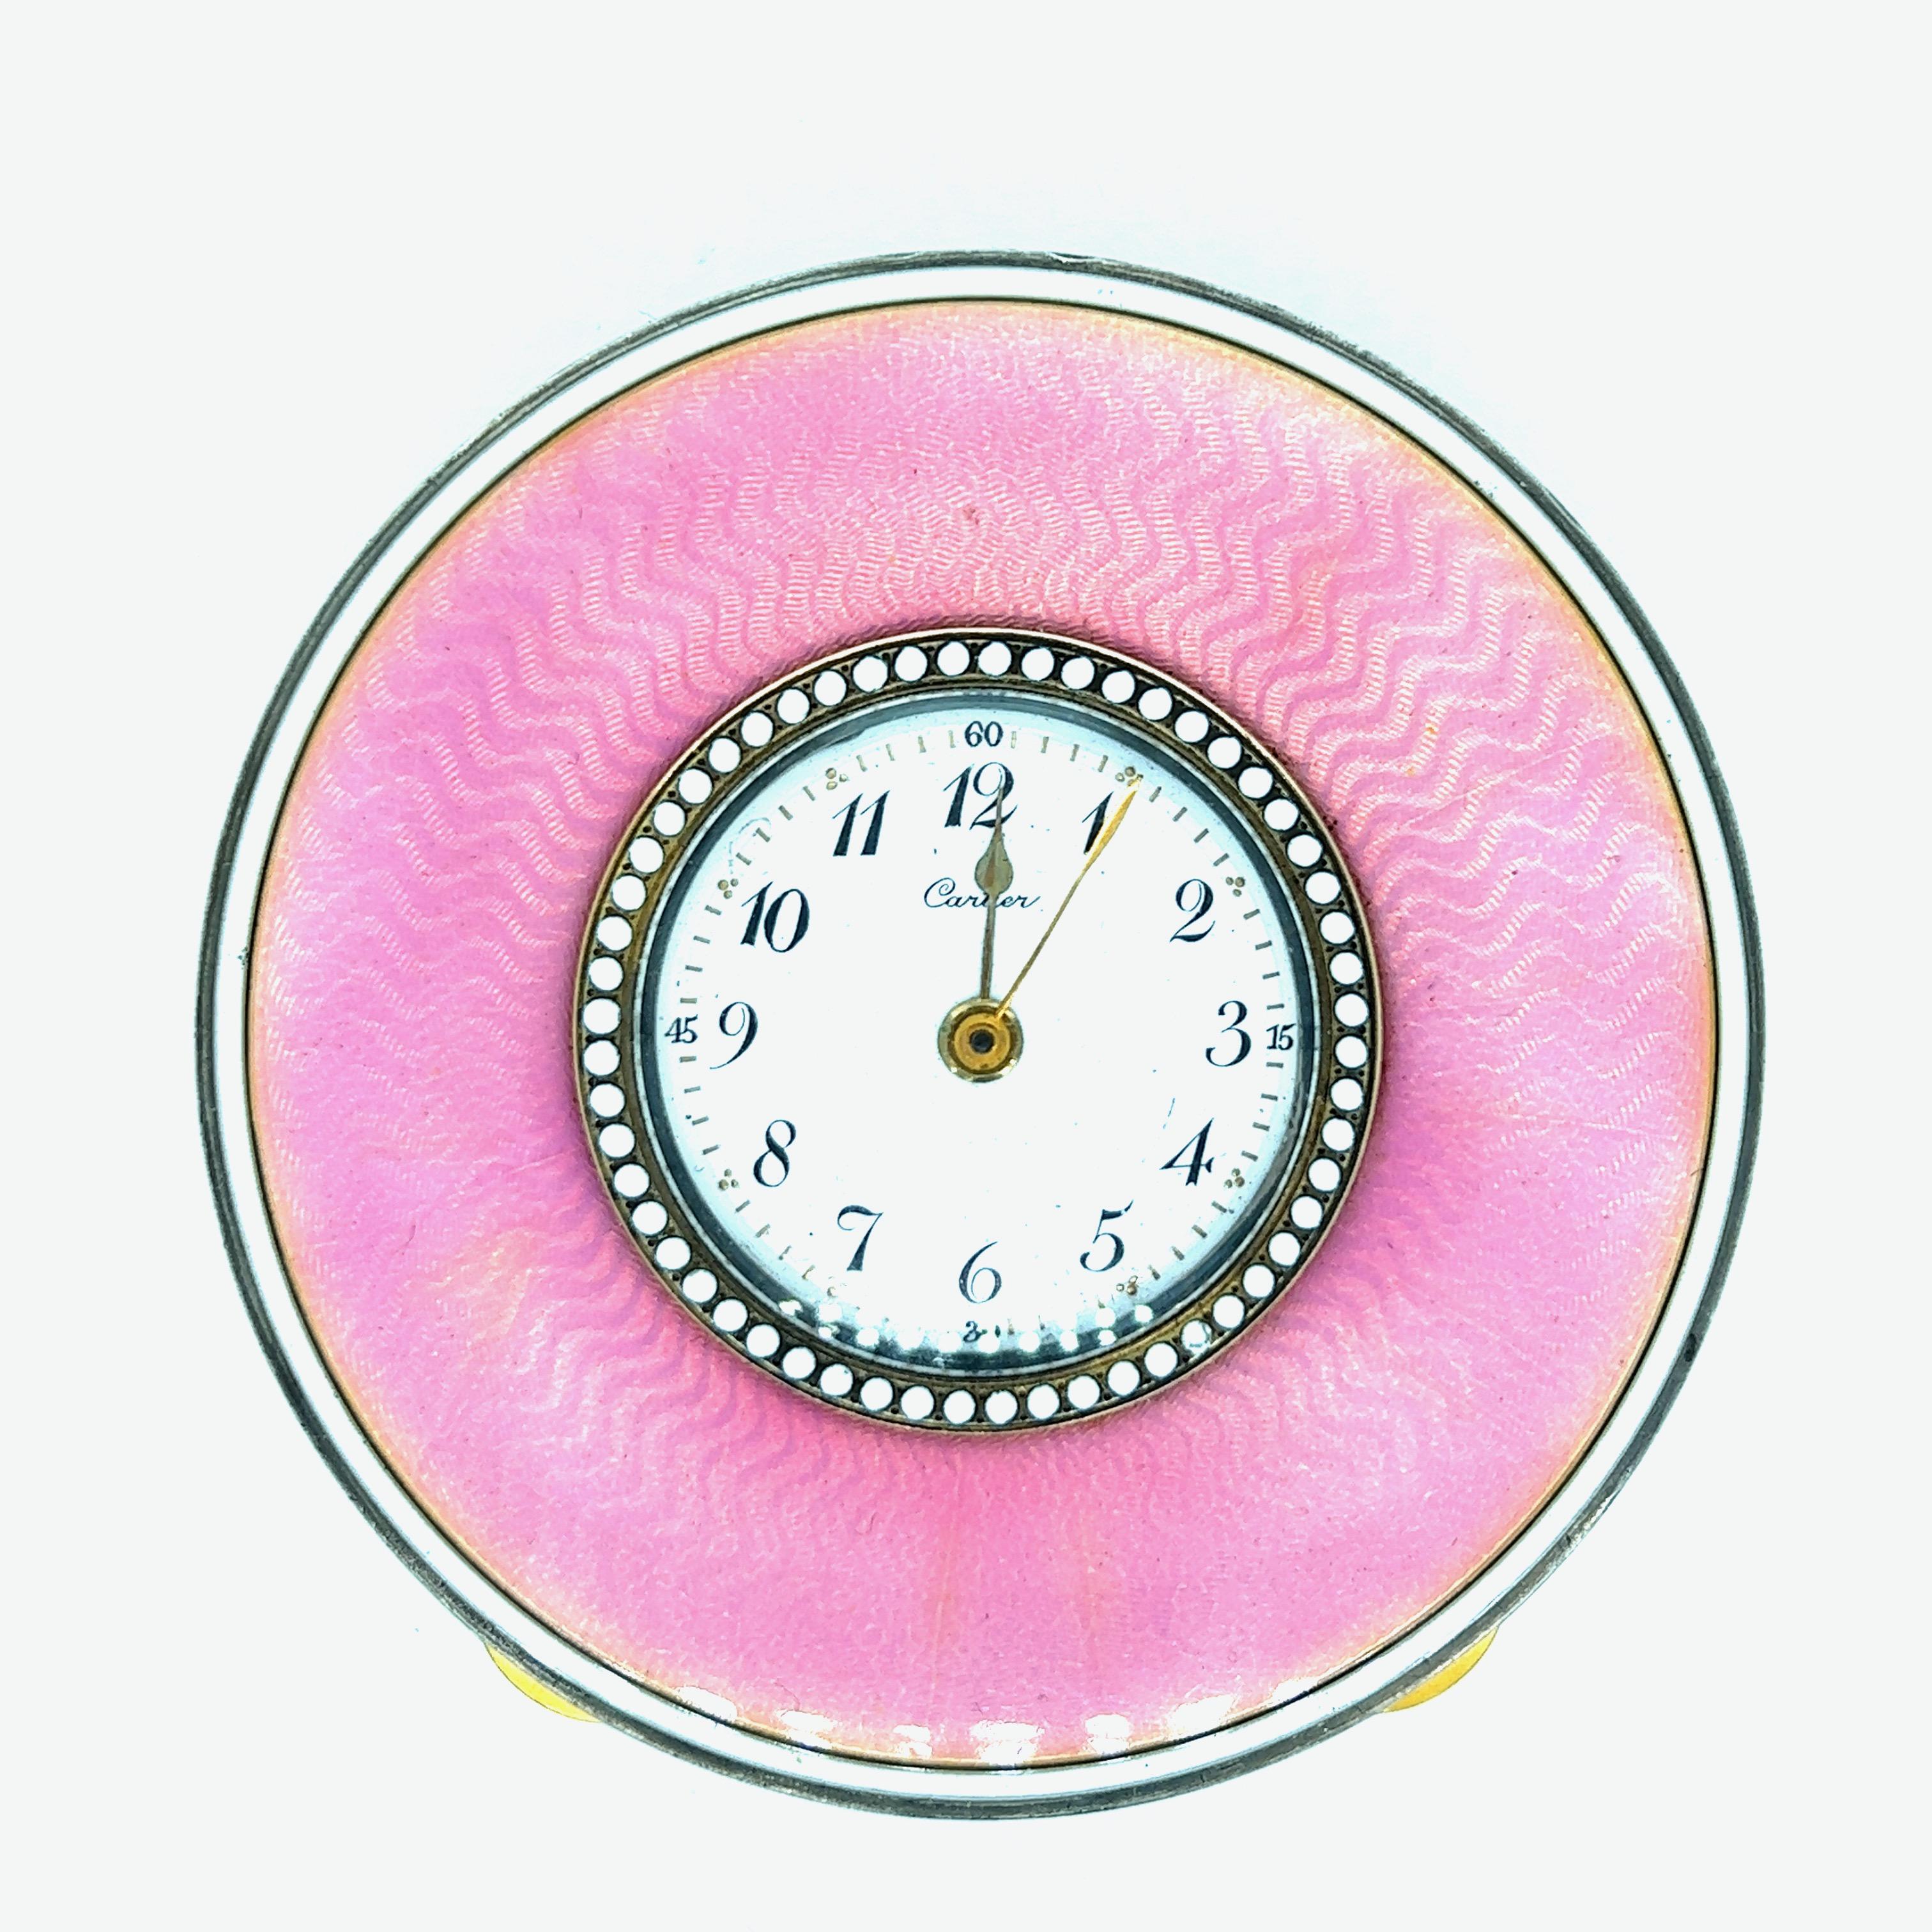 Cartier pink enamel desk clock, circa 1910s

Circular-shaped dial with Arabic numerals, white enamel dotted bezel surrounding the dial, pink guilloché enamel case with white enamel border; marked Cartier

Size: diameter 2.68 inches
Total weight: